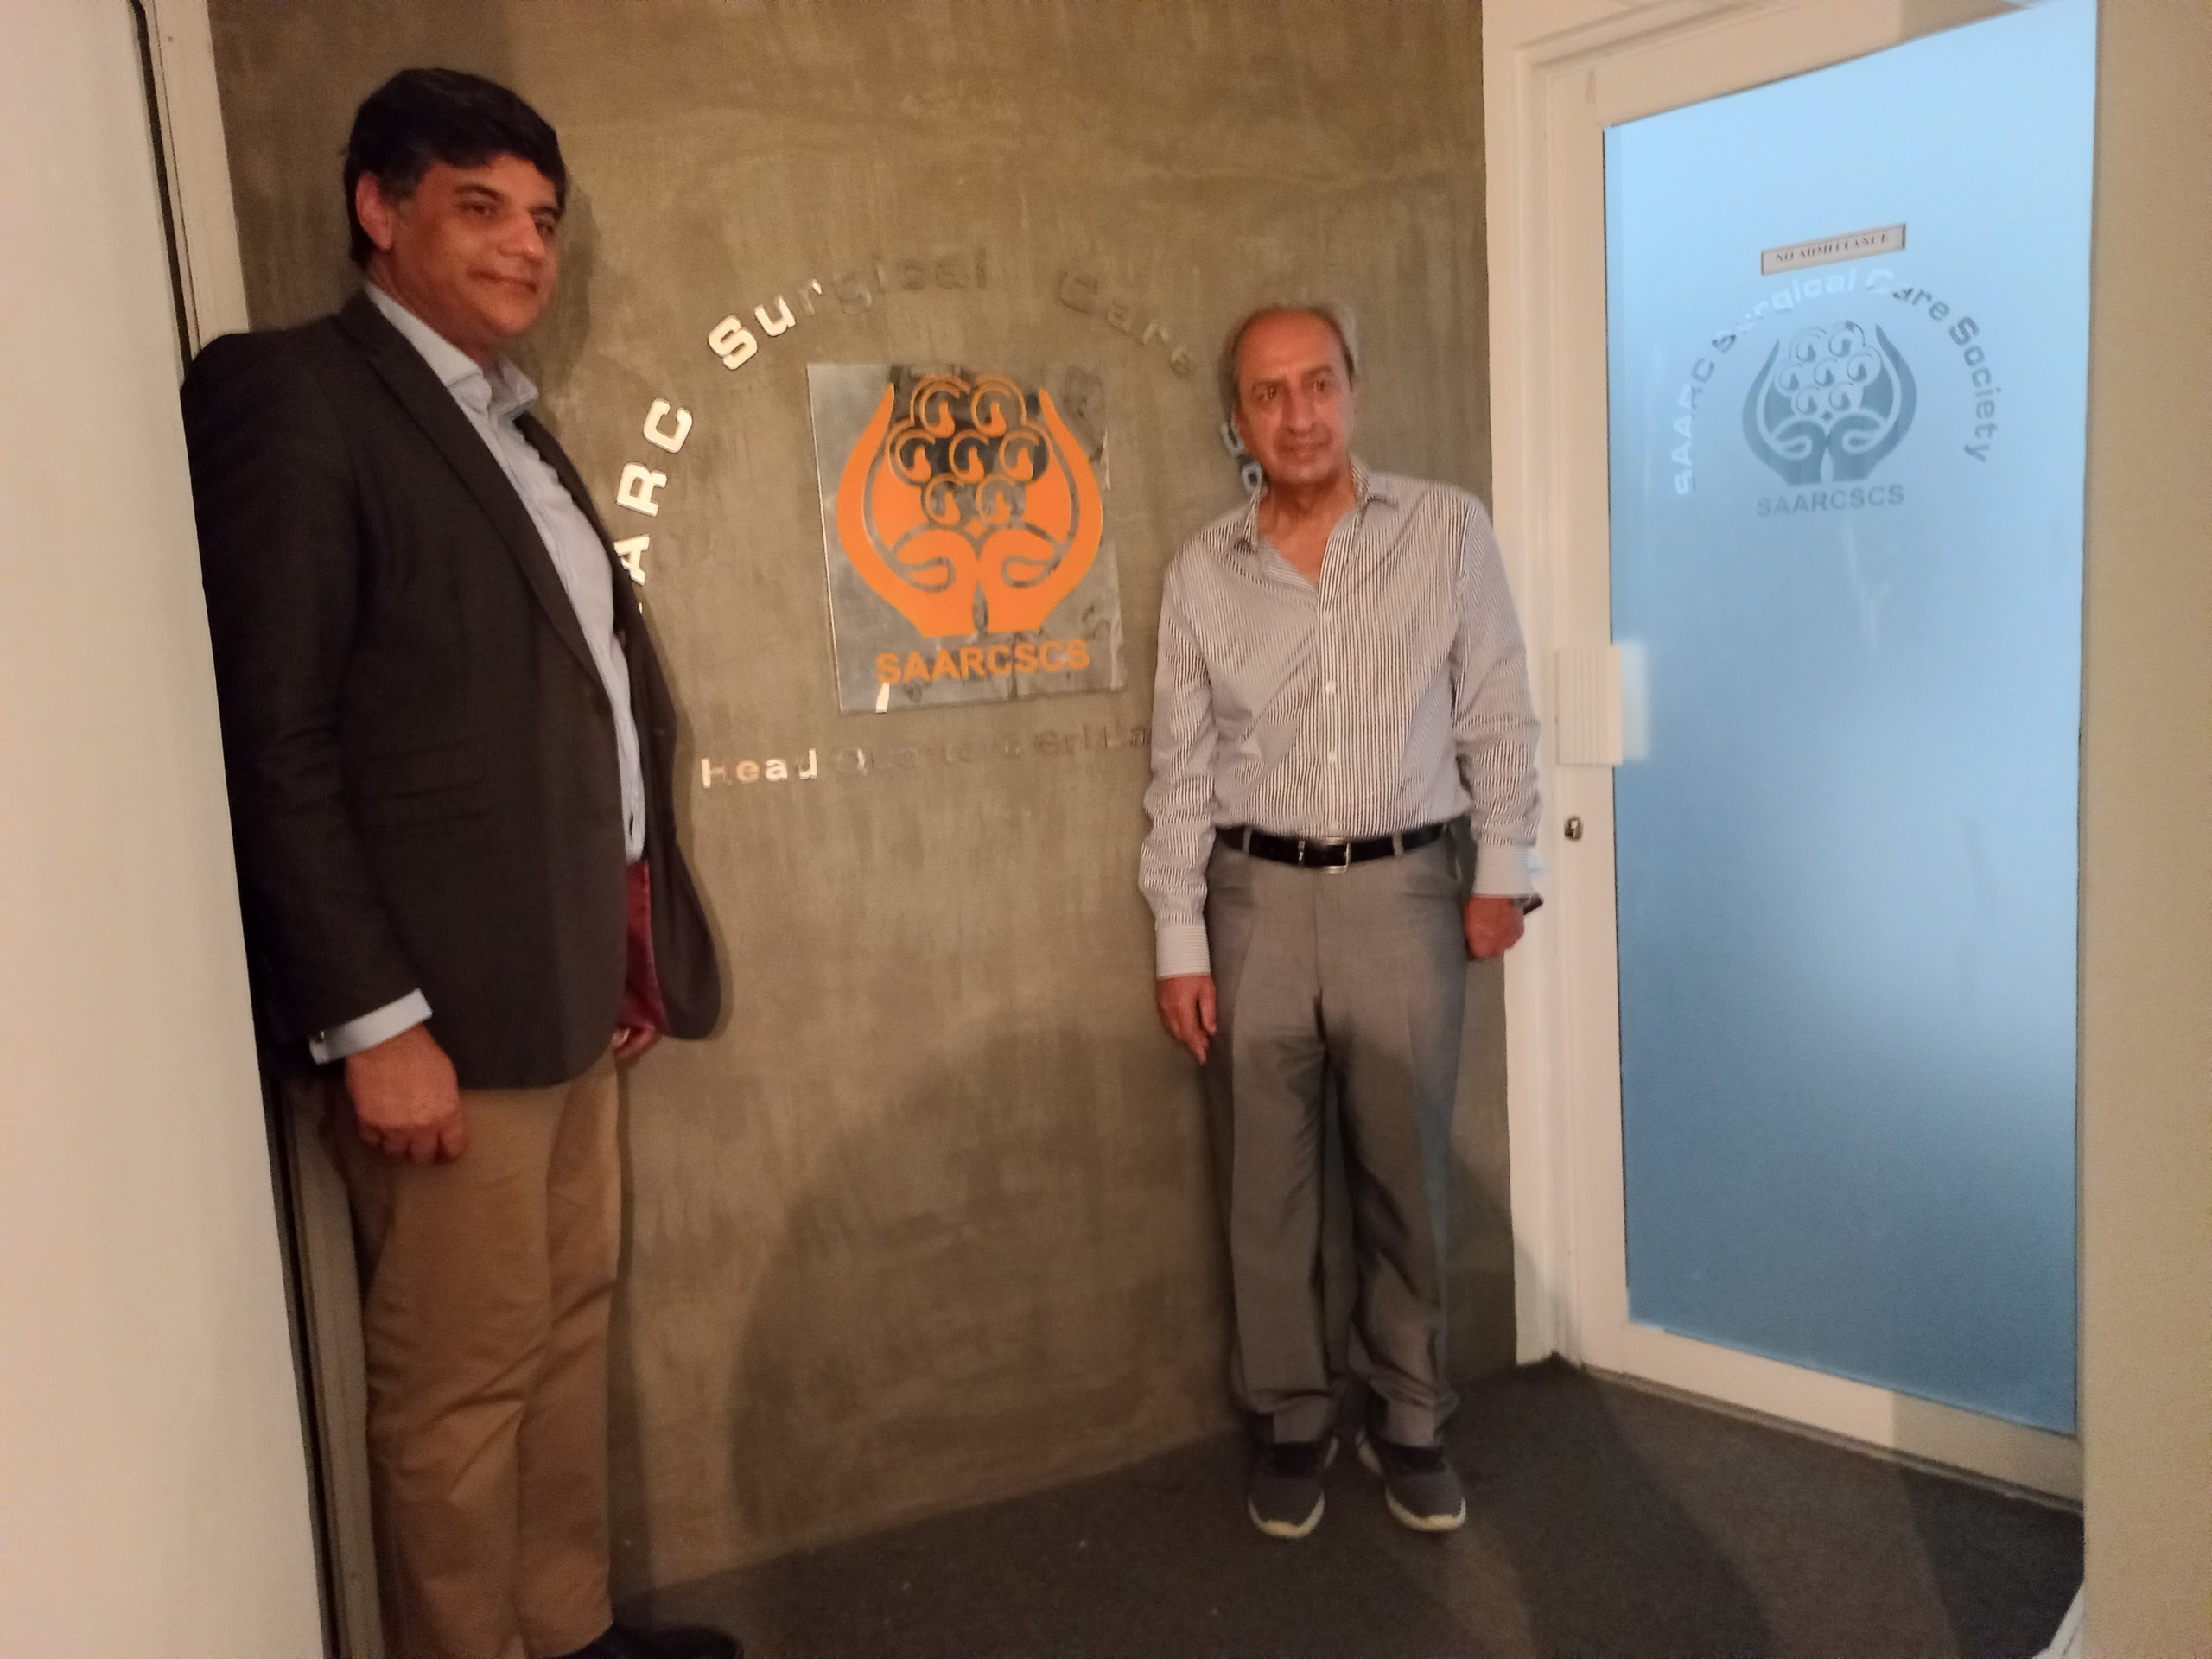 Two distinguished Members of the SAARC Surgical Care Society Executive Committee, Prof Farook Afzal and Prof Abdul Majeed Chaudhry from Pakistan visited the SAARC Surgical Care Society Head Office at Rajagiriya, Sri Lanka